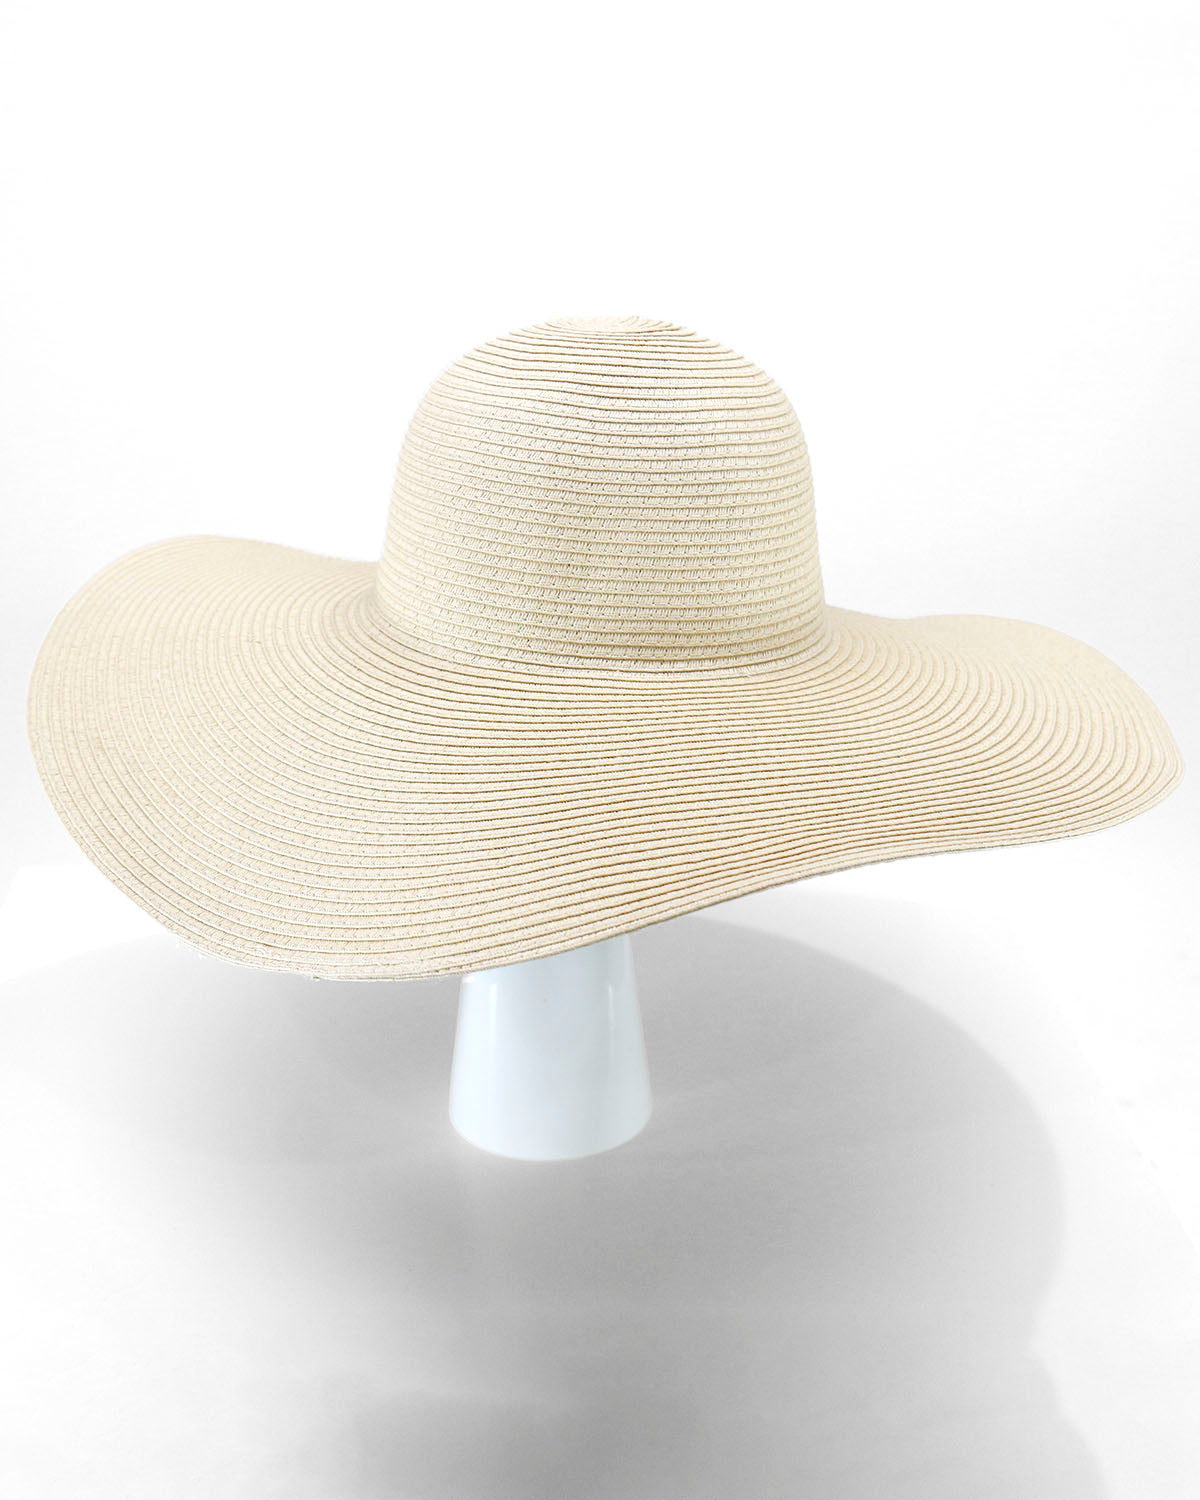 Handmade Lace Up Newborn Straw Hat For Kids Perfect For Summer Beach Days  And Fishing From Sunbb03, $6.86